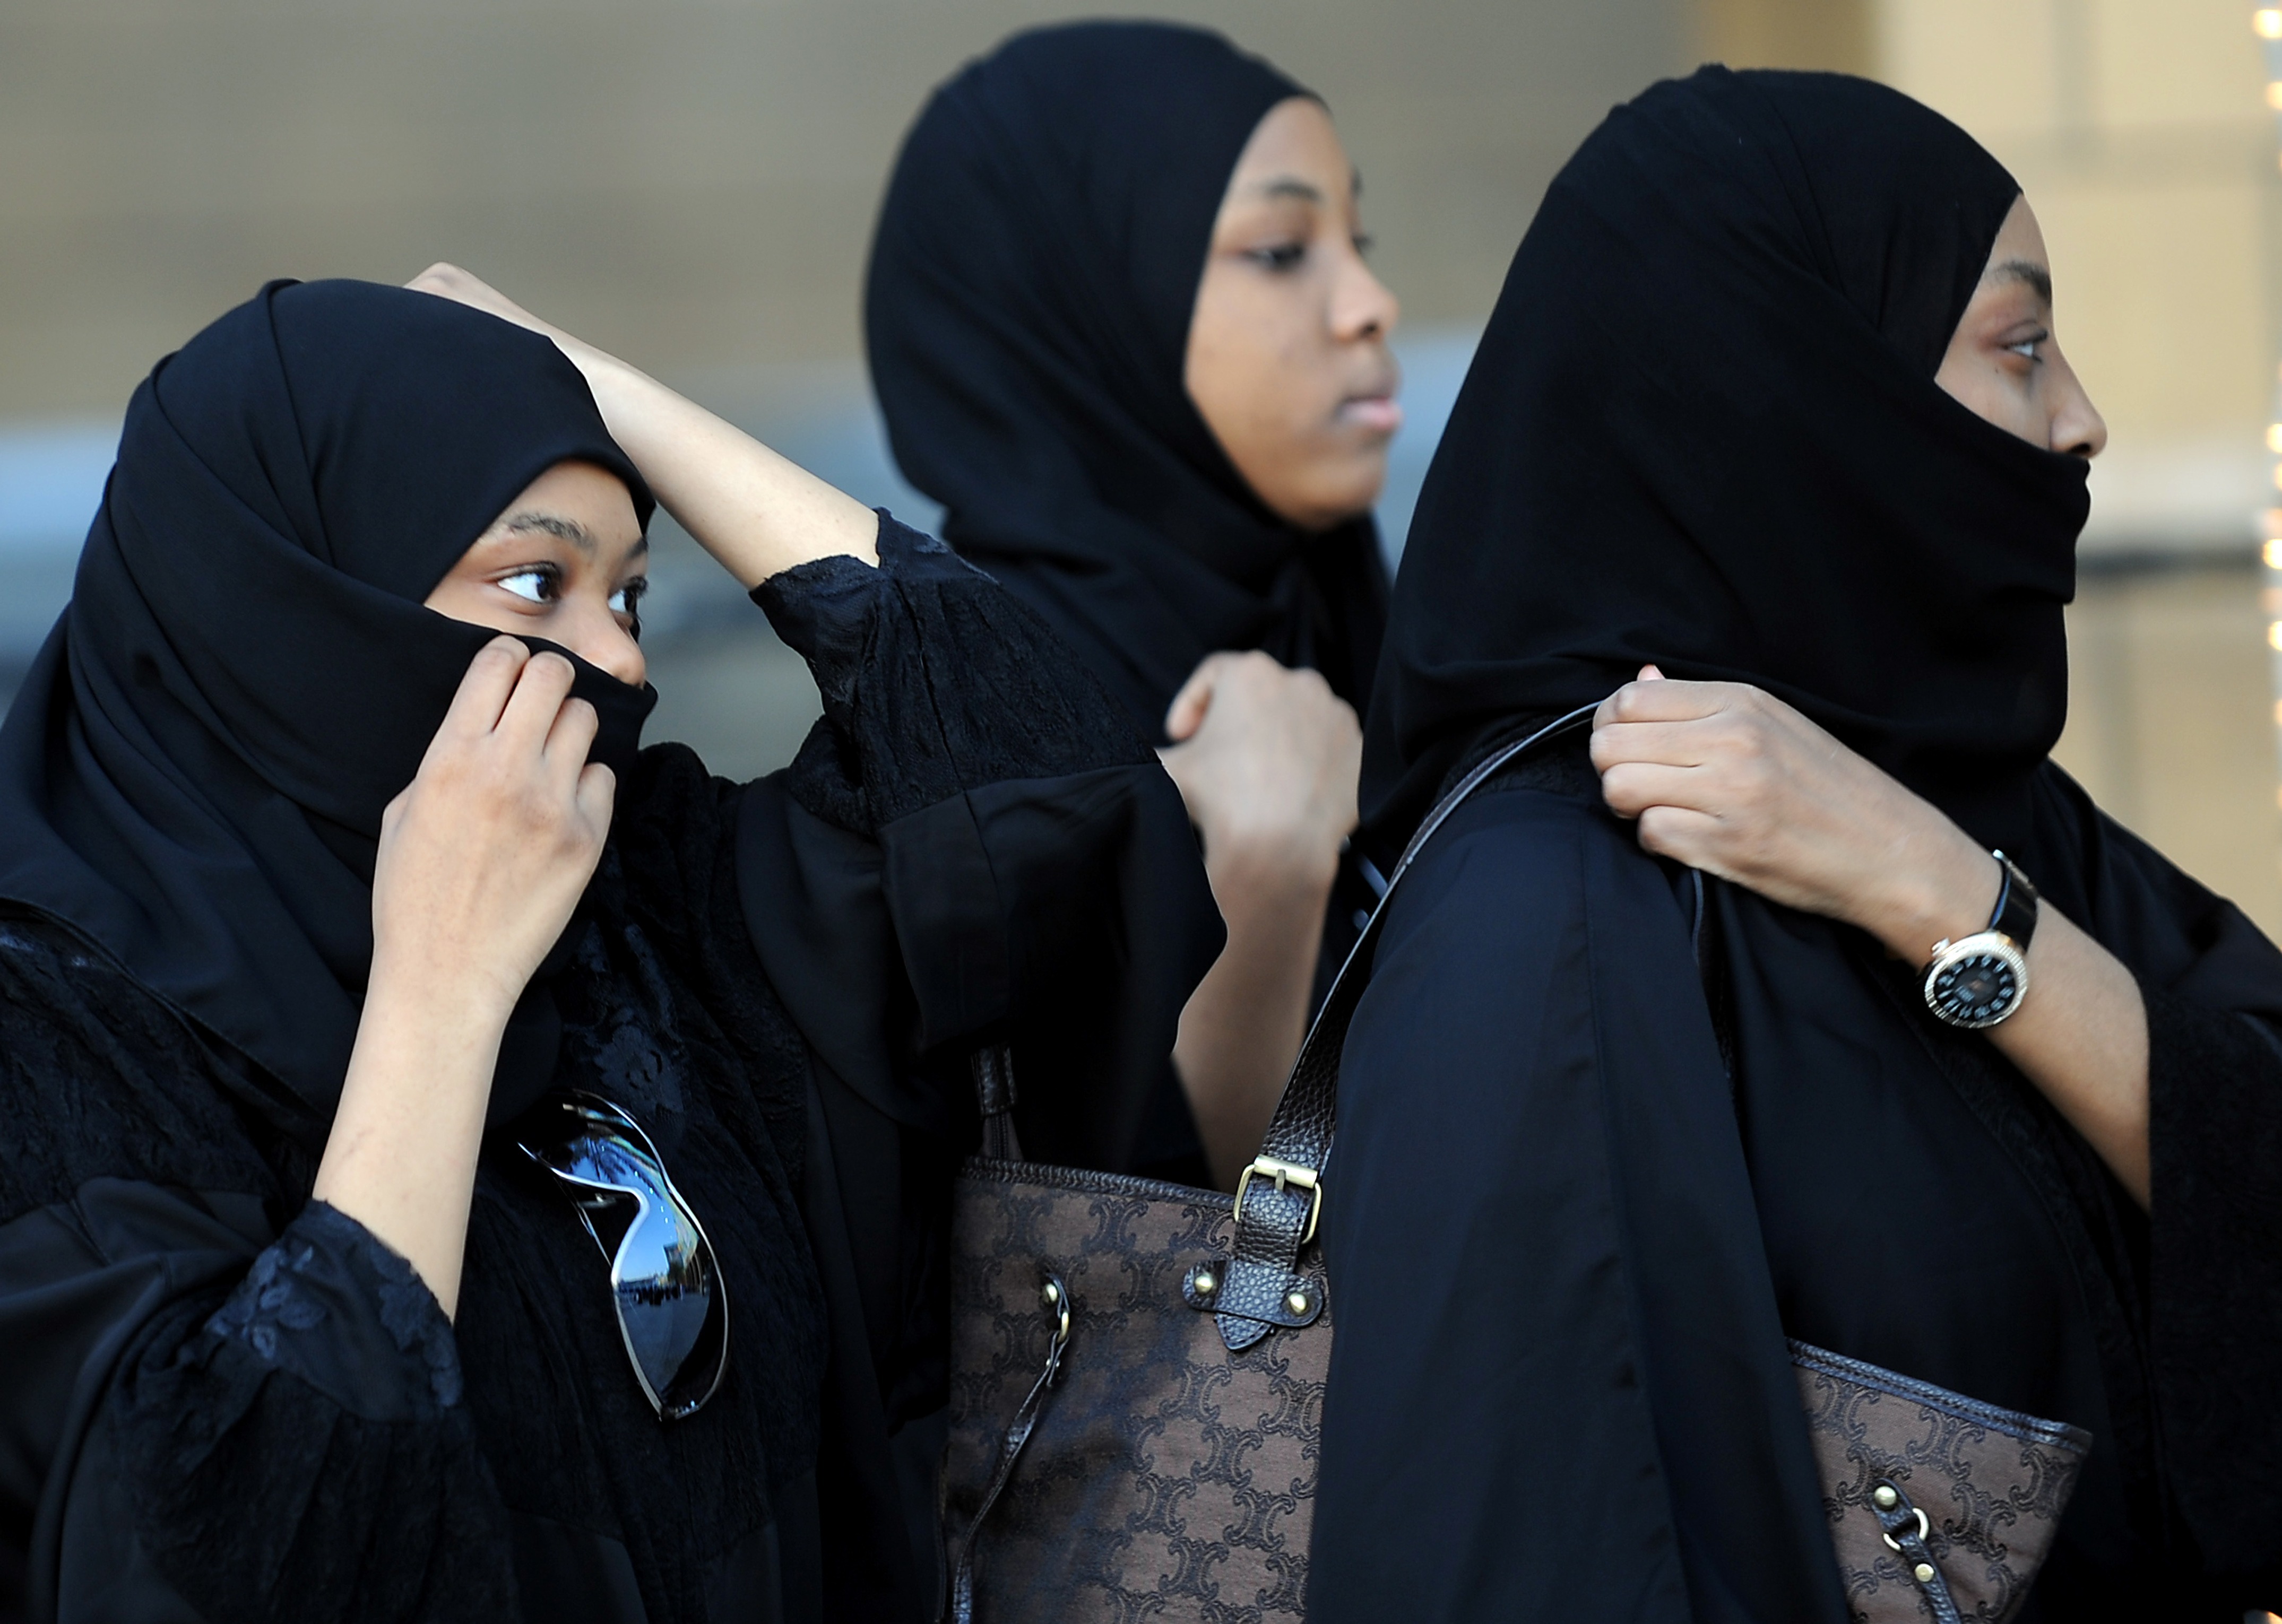 Saudi women attend prayers at a mosque in Riyadh. Women’s-rights groups are gaining influence in the kingdom. (Fayez Nureldine—AFP/Getty Images)